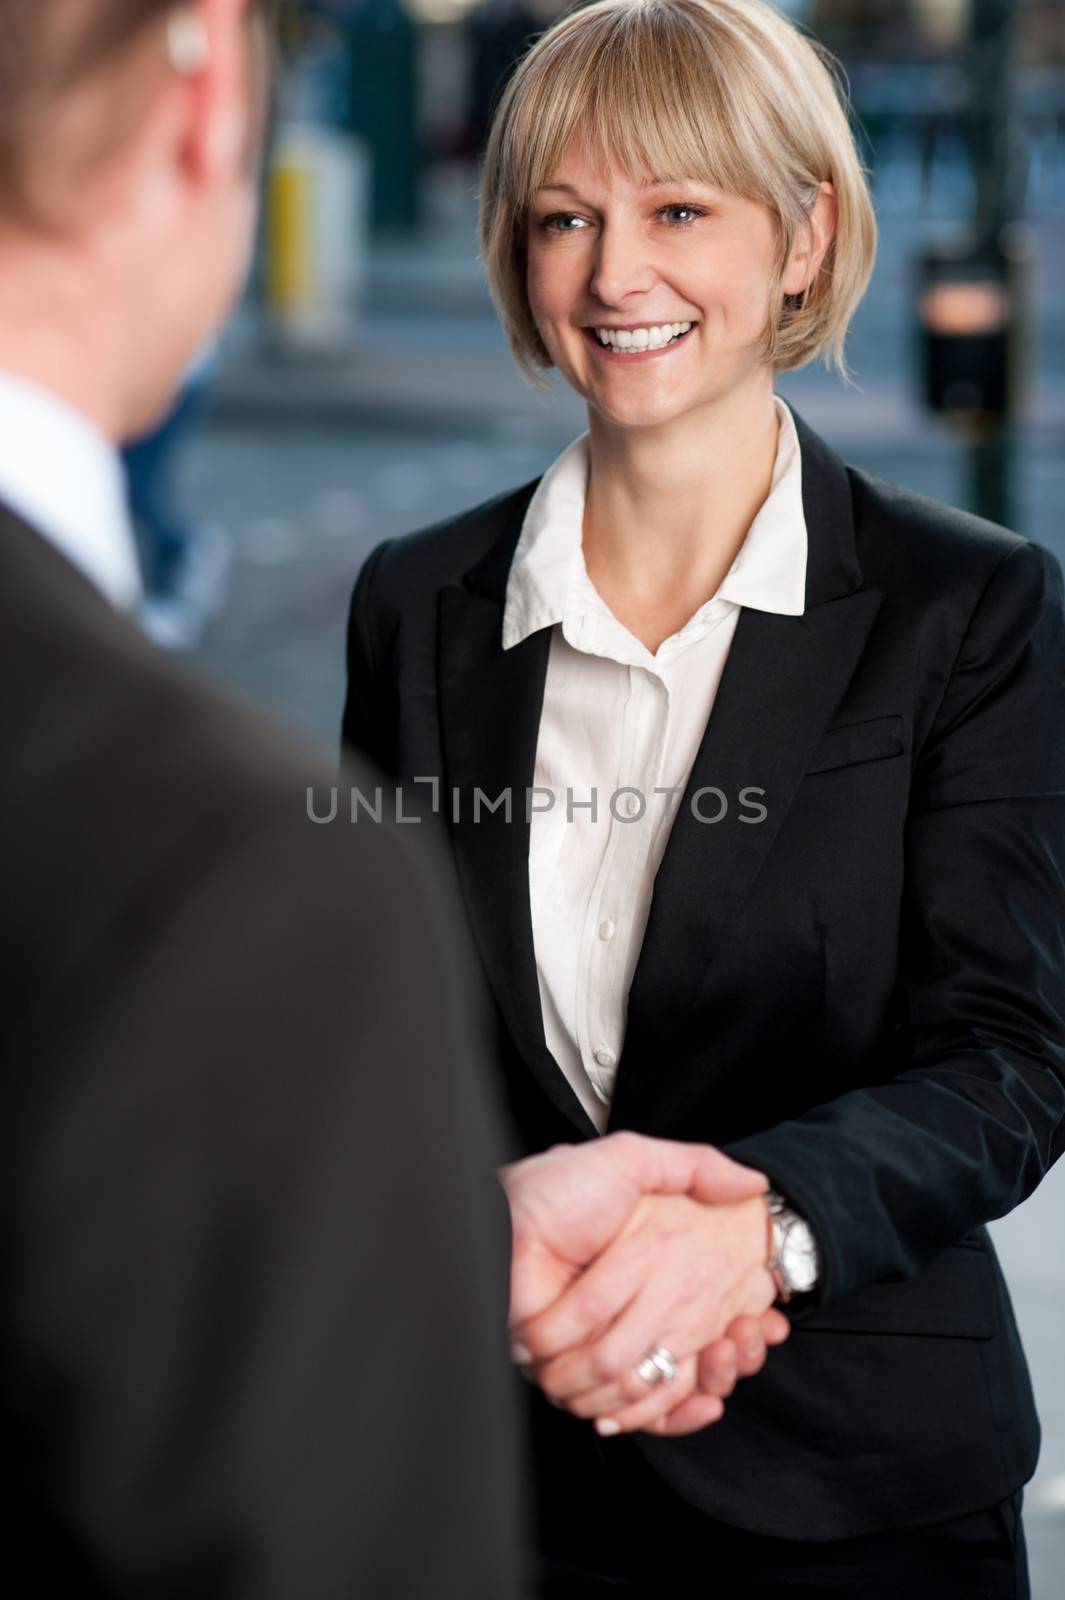 Two corporate identities shaking hands by stockyimages